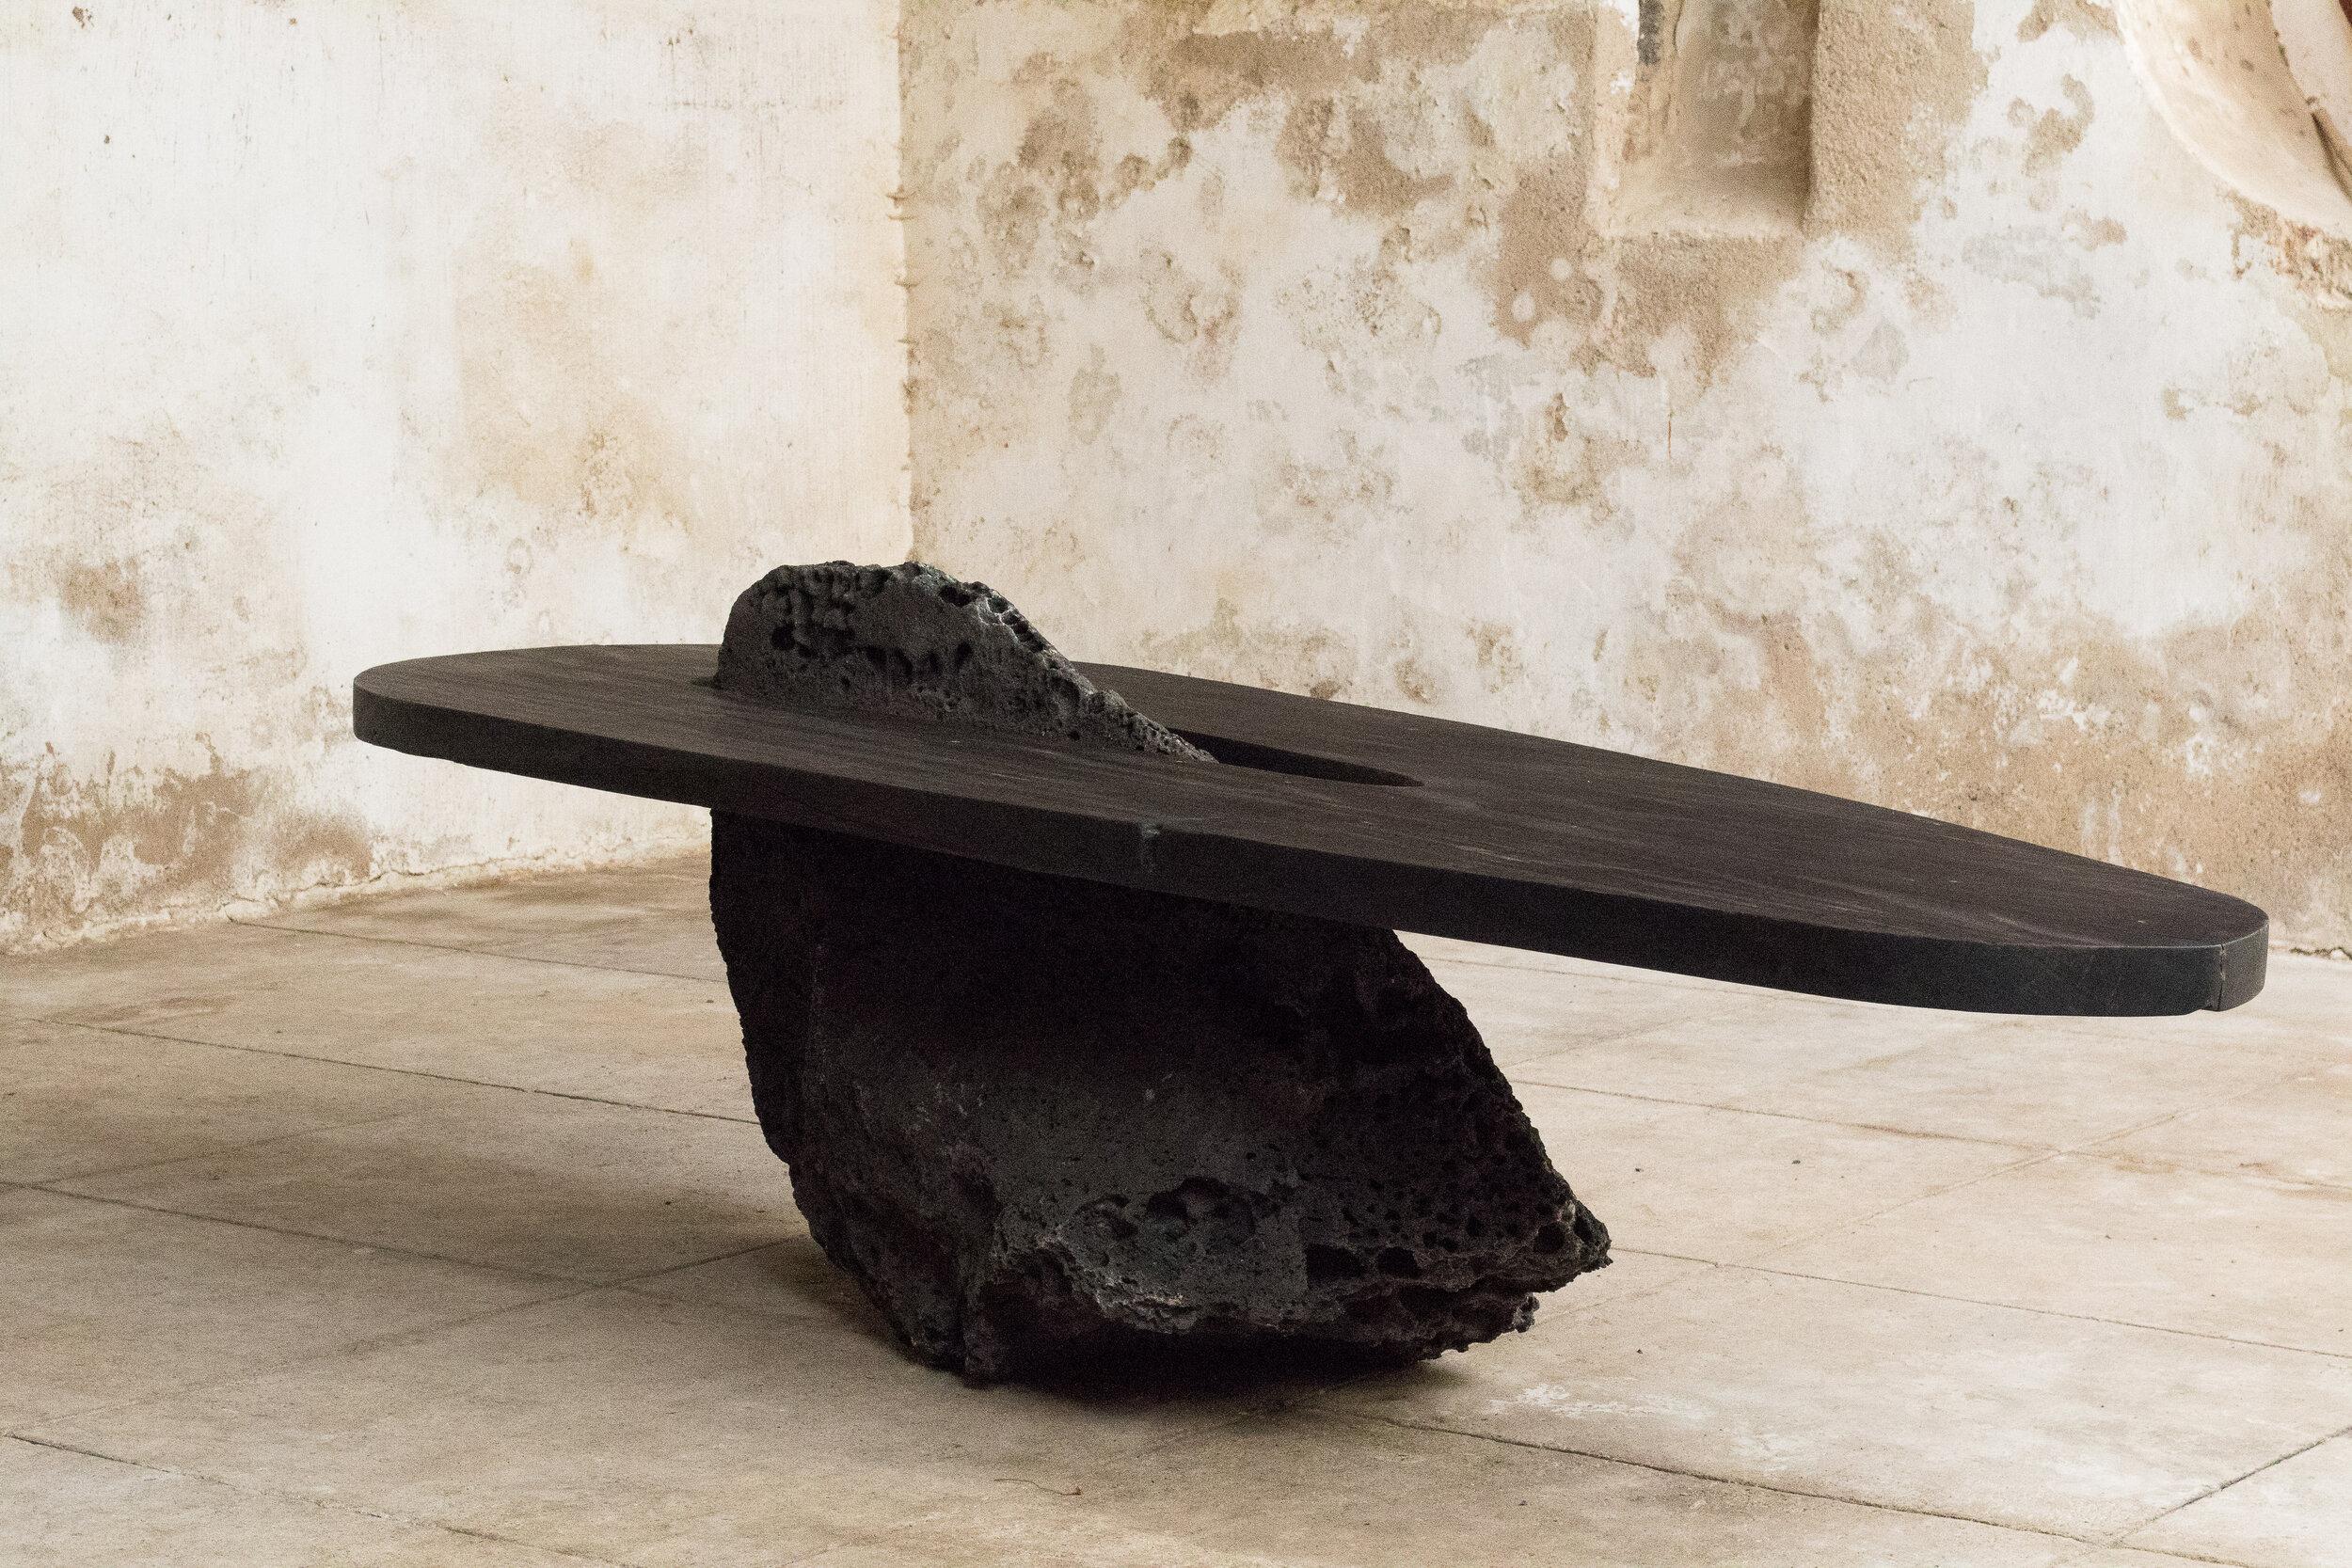 One-of-a-kind dining table.

Born in Romania in 1986, Mircea Anghel is a self-taught designer based in Portugal and the founder of Cabana Studio. From a young age, growing up in Bucharest, he displayed a particular interest in mathematics and always